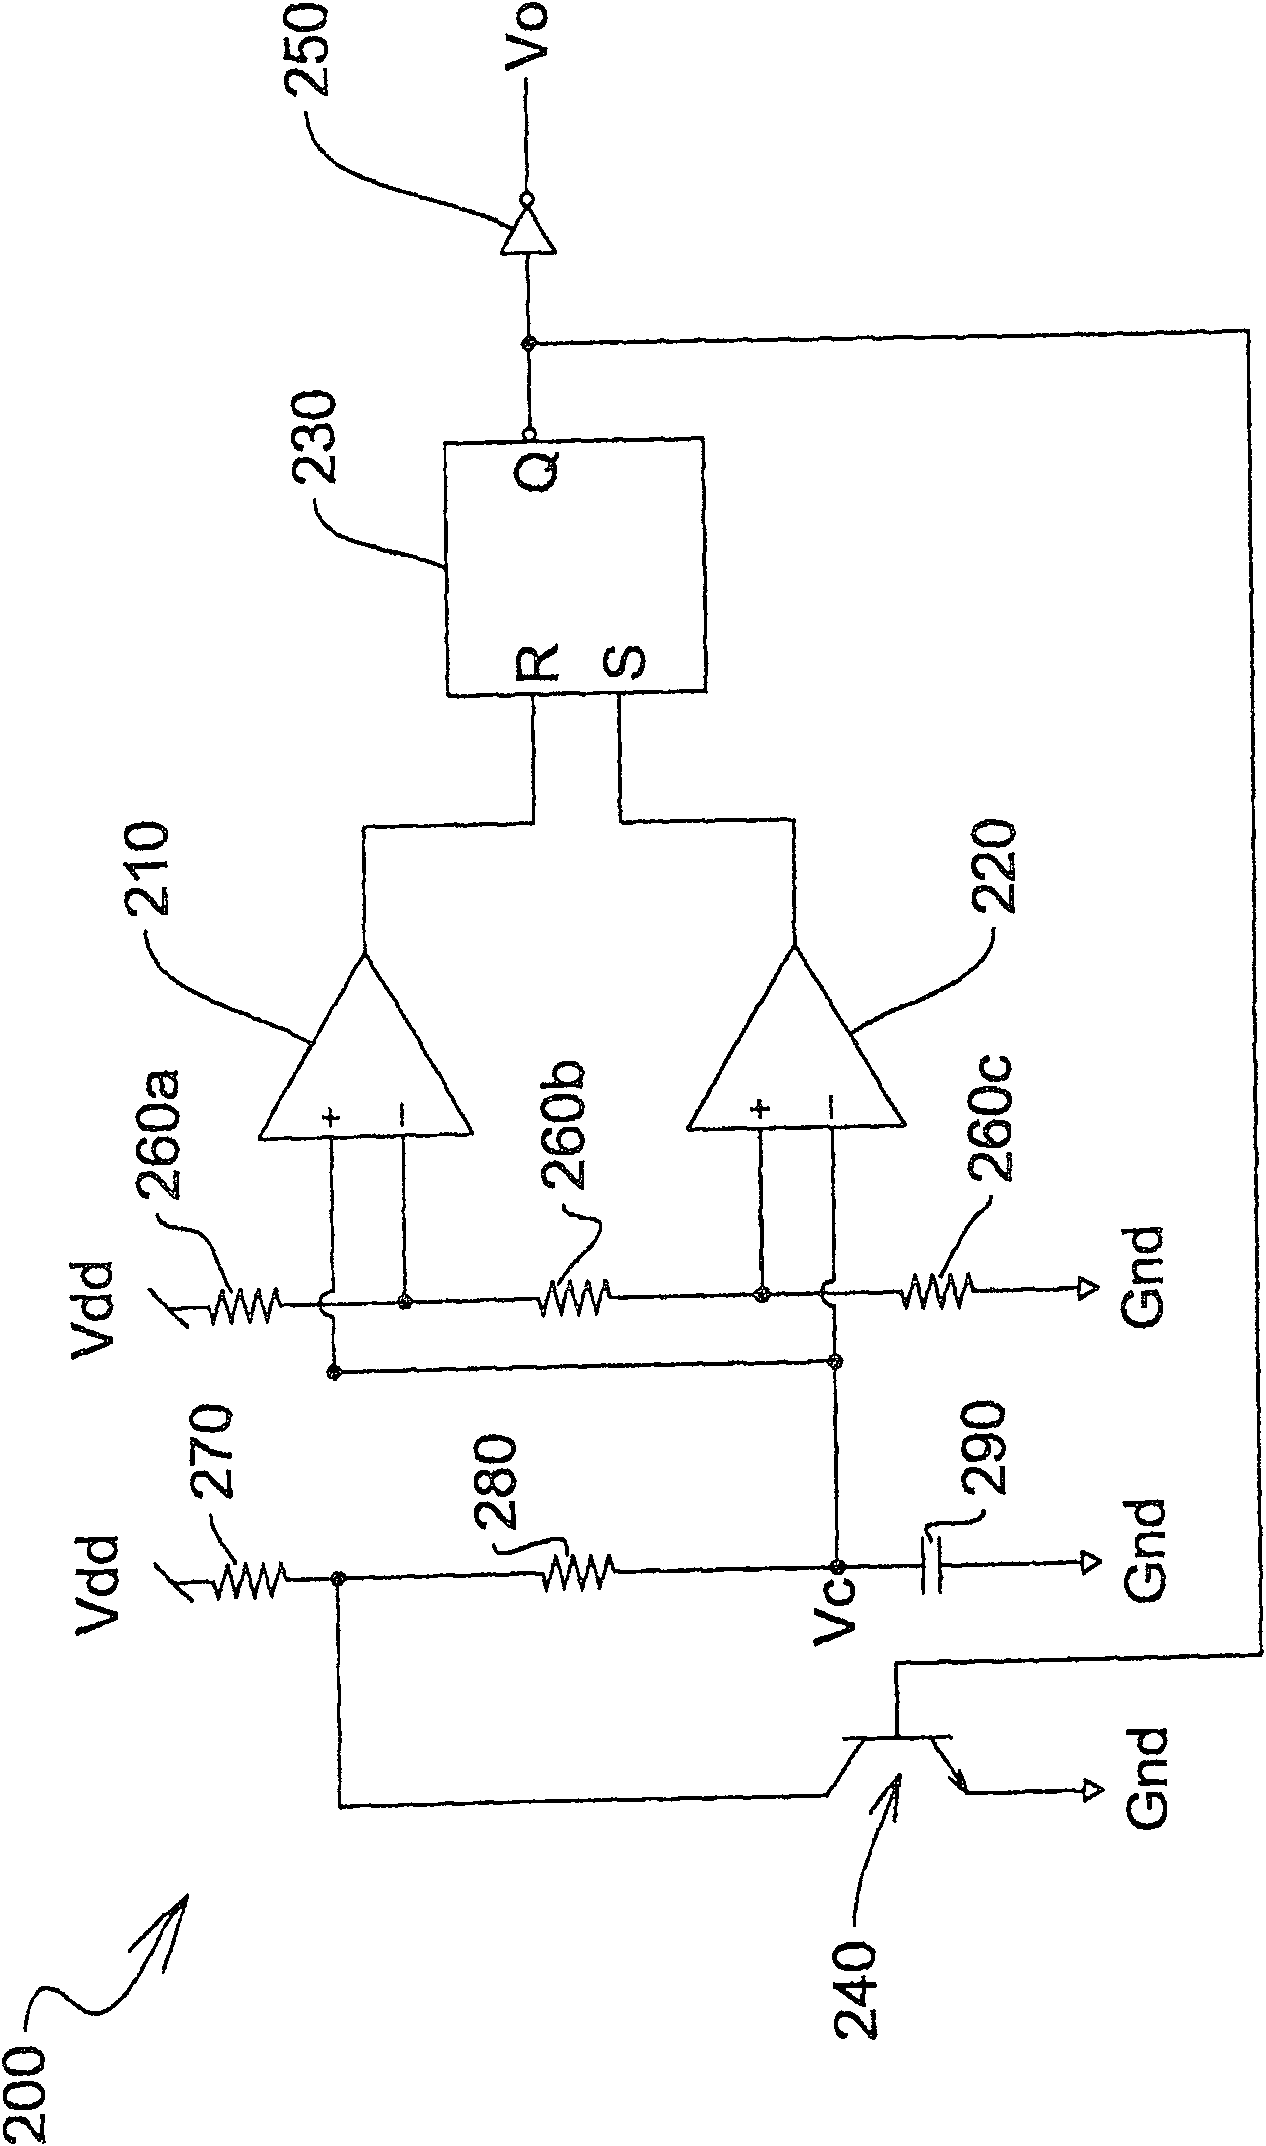 Stable oscillator without influence of temperature variation and power supply voltage variation